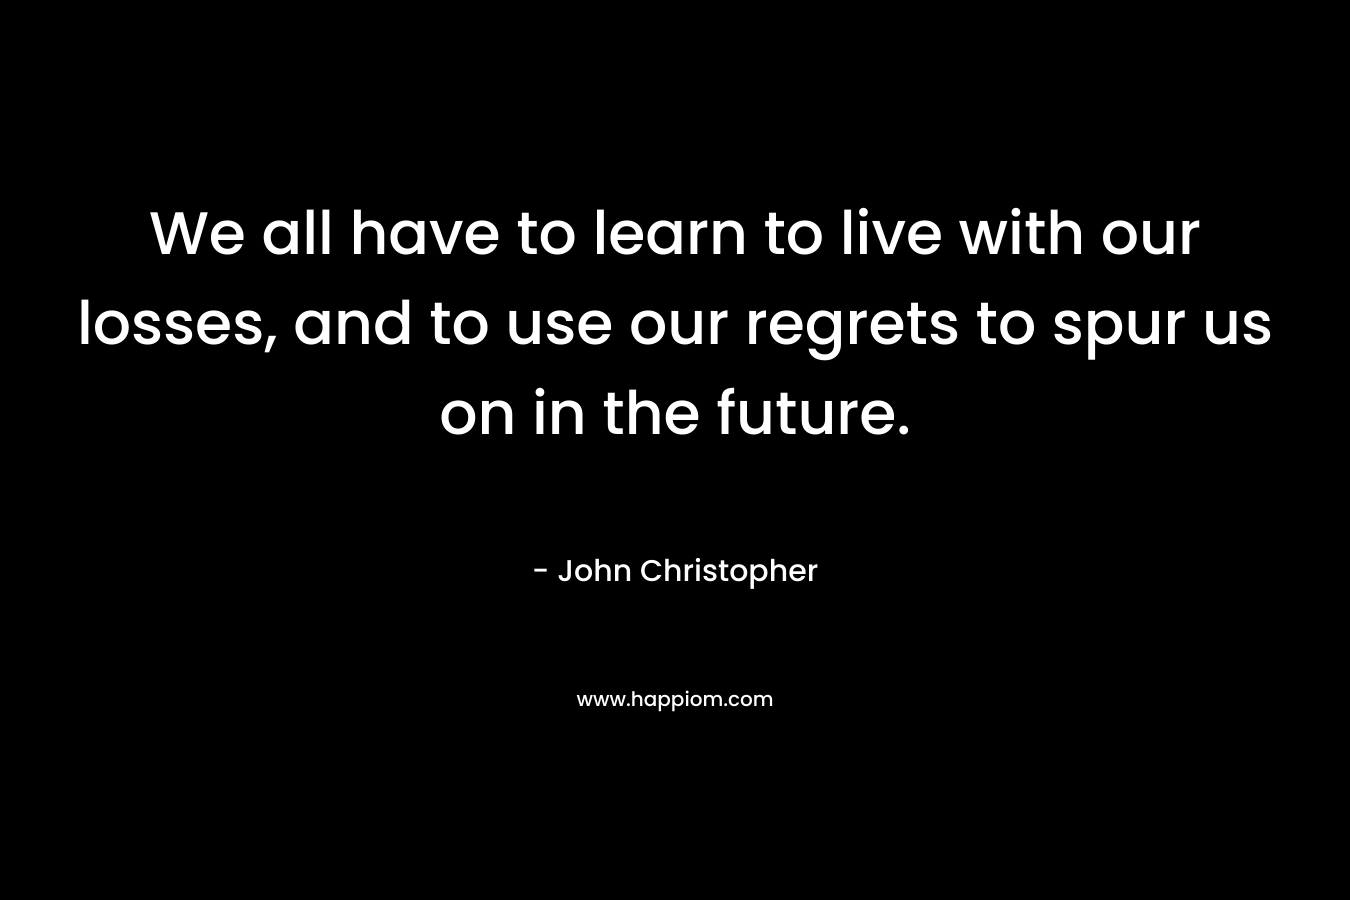 We all have to learn to live with our losses, and to use our regrets to spur us on in the future.